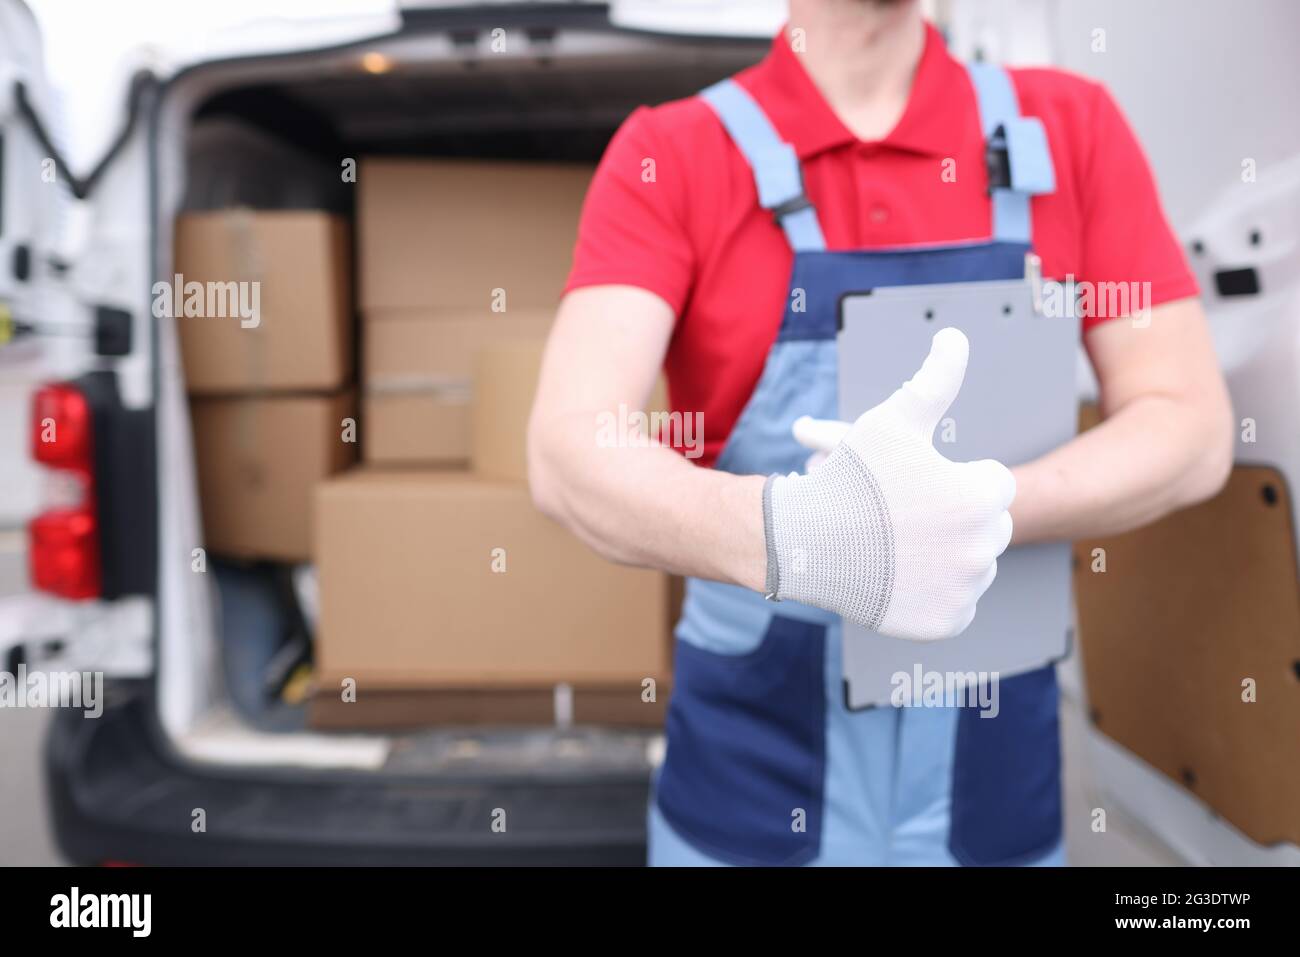 Loader driver in uniform holds a thumbs up in background of car with boxes Stock Photo